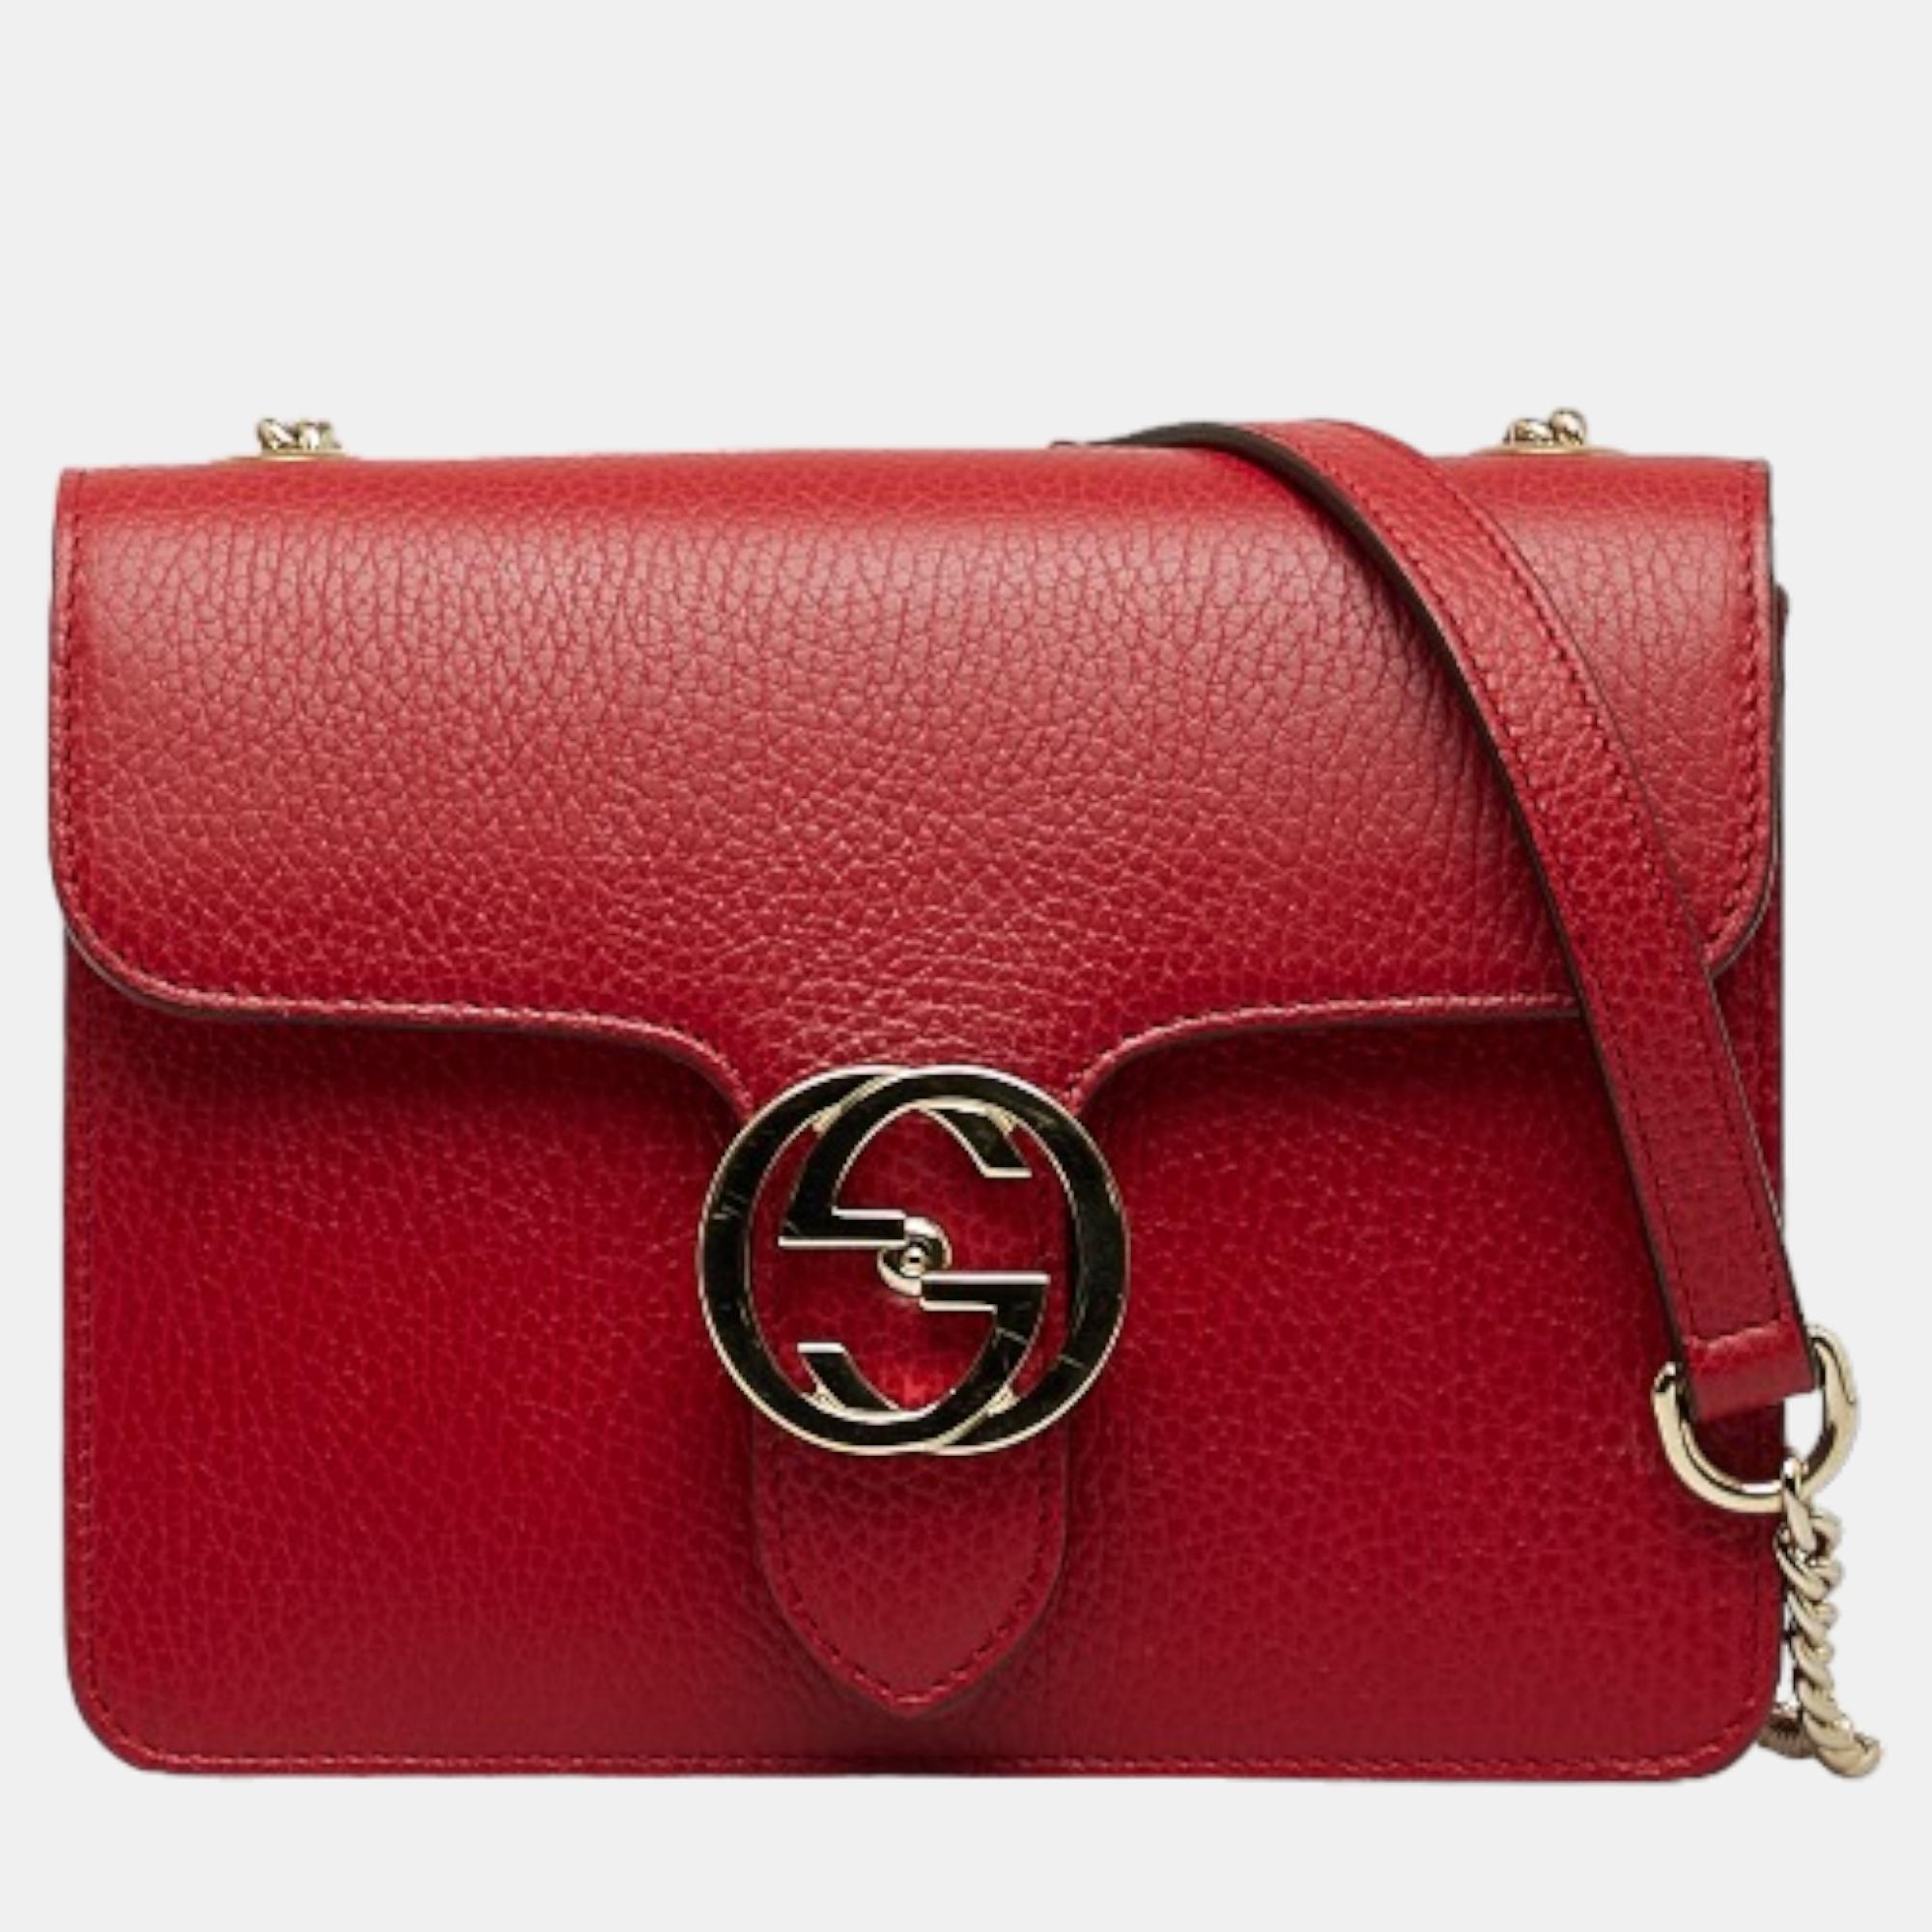 Gucci red leather small interlocking g shoulder bag